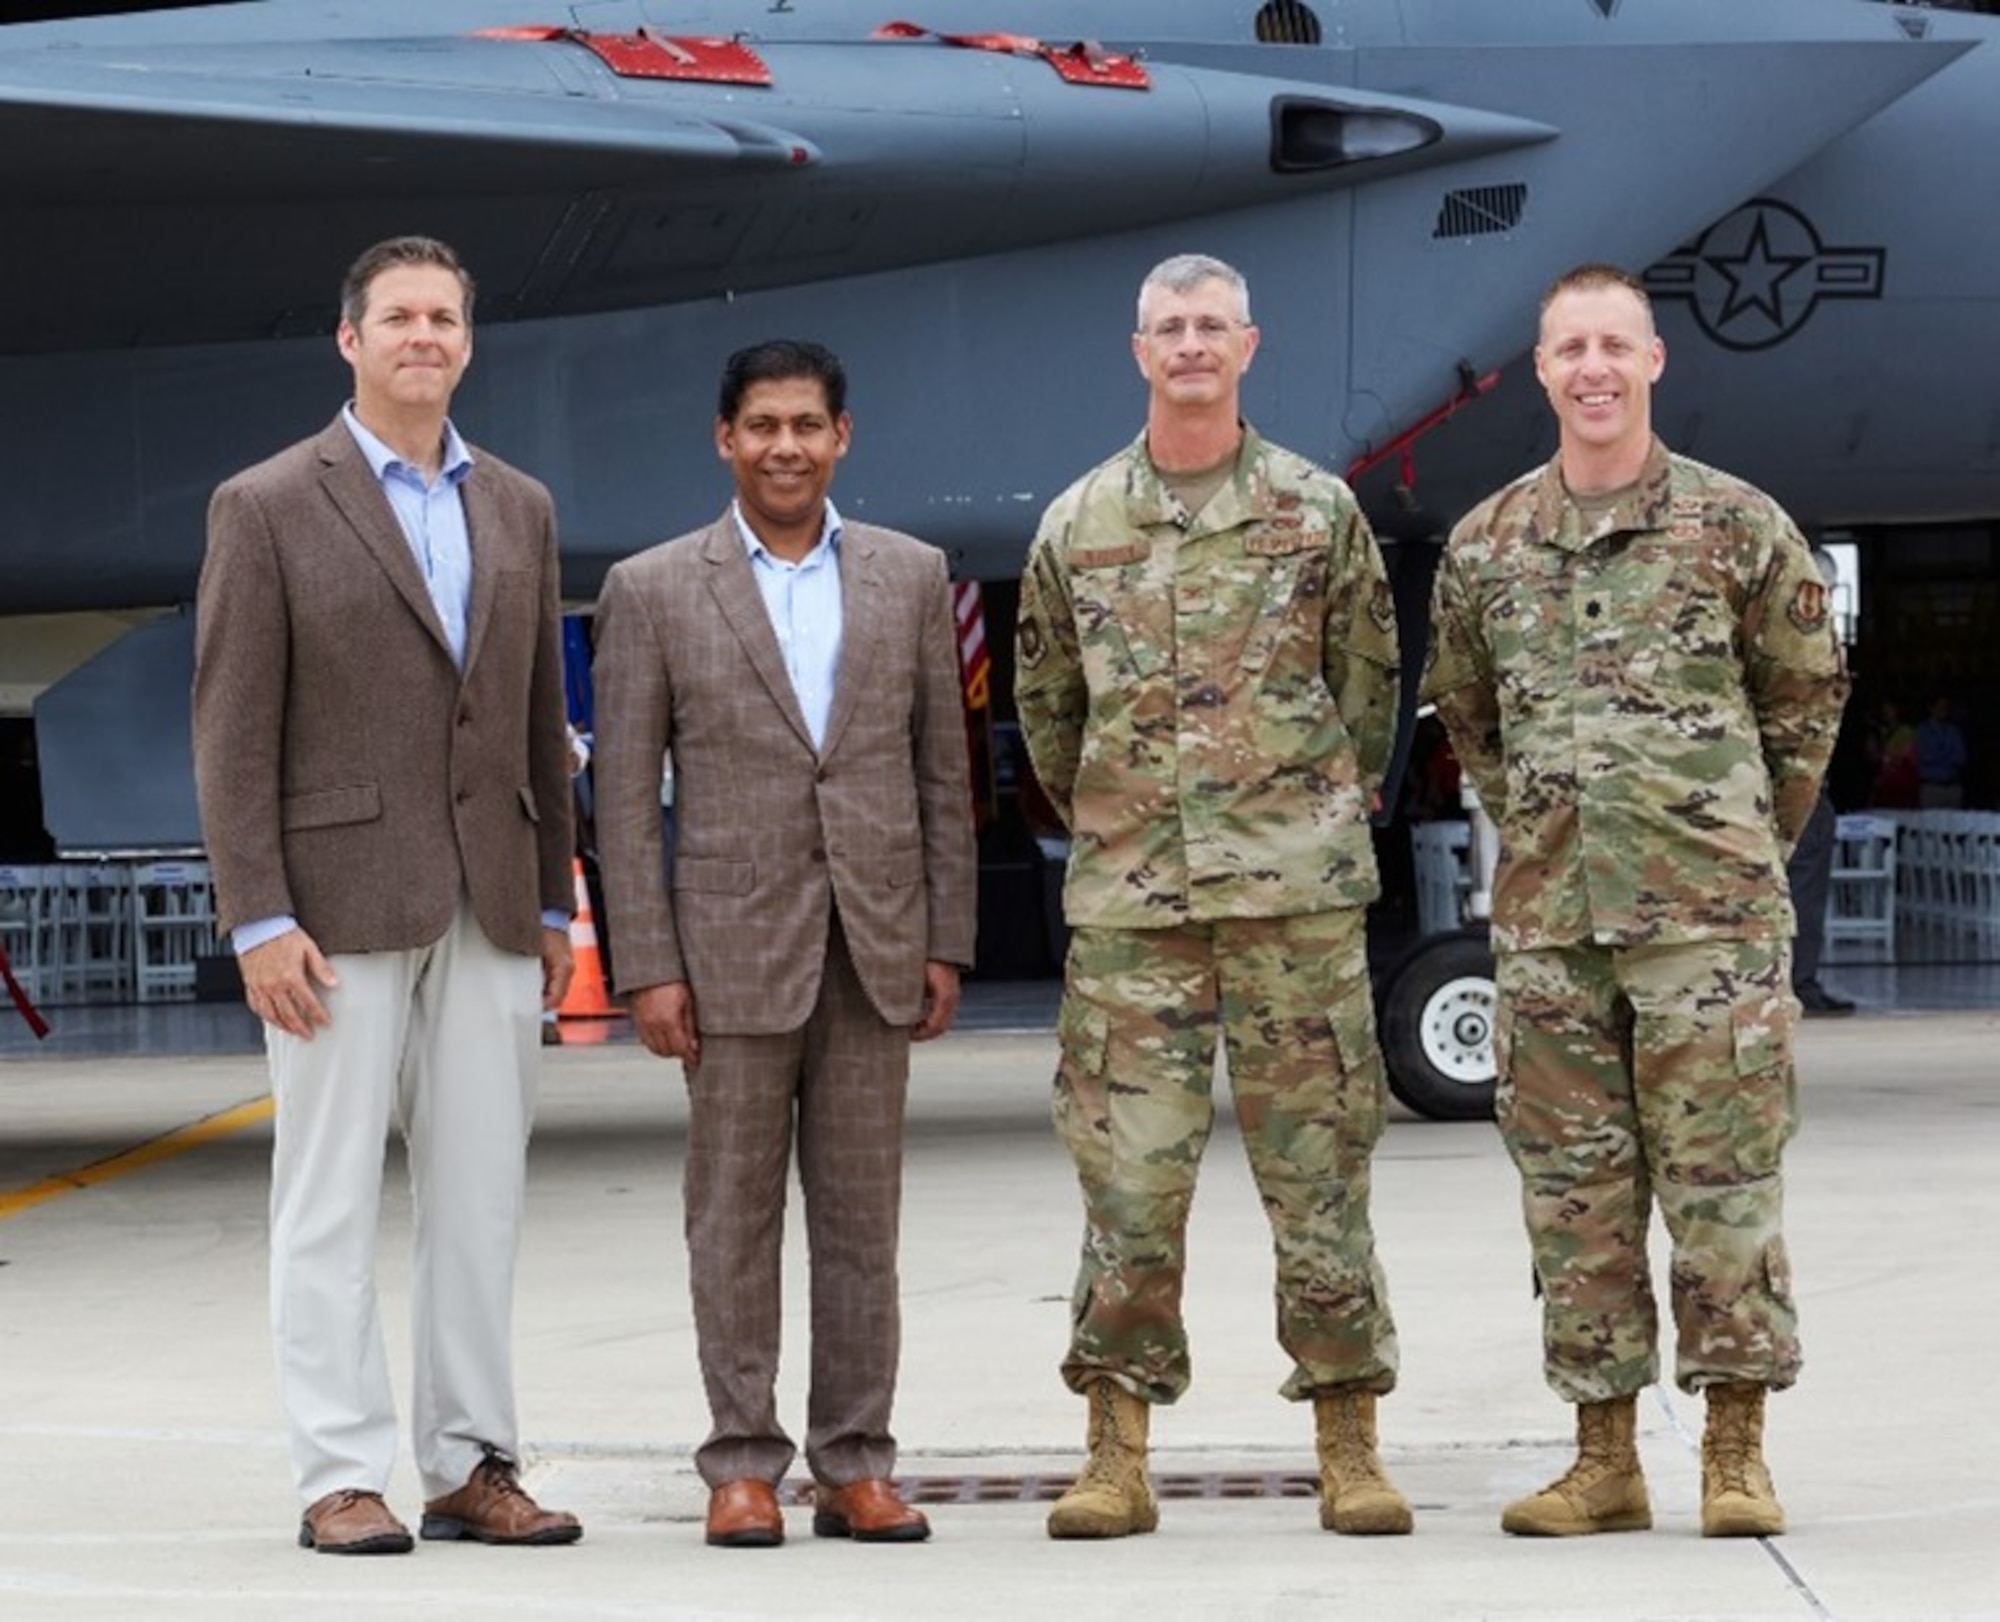 From left to right, Doug Stroud, Boeing F-15 EPAWSS Program Manager, Pratyush “Prat” Kumar, Boeing Vice President and Program Manager of F-15 Programs, Col. Jesse Warren, F-15 System Program Manager, and Lt. Col. Dan Carroll, F-15 EPAWSS Program Manager, stand in front of the second F-15E Strike Eagle starting the extensive EPAWSS upgrade at the Boeing San Antonio Modification Facility. (Courtesy photo)